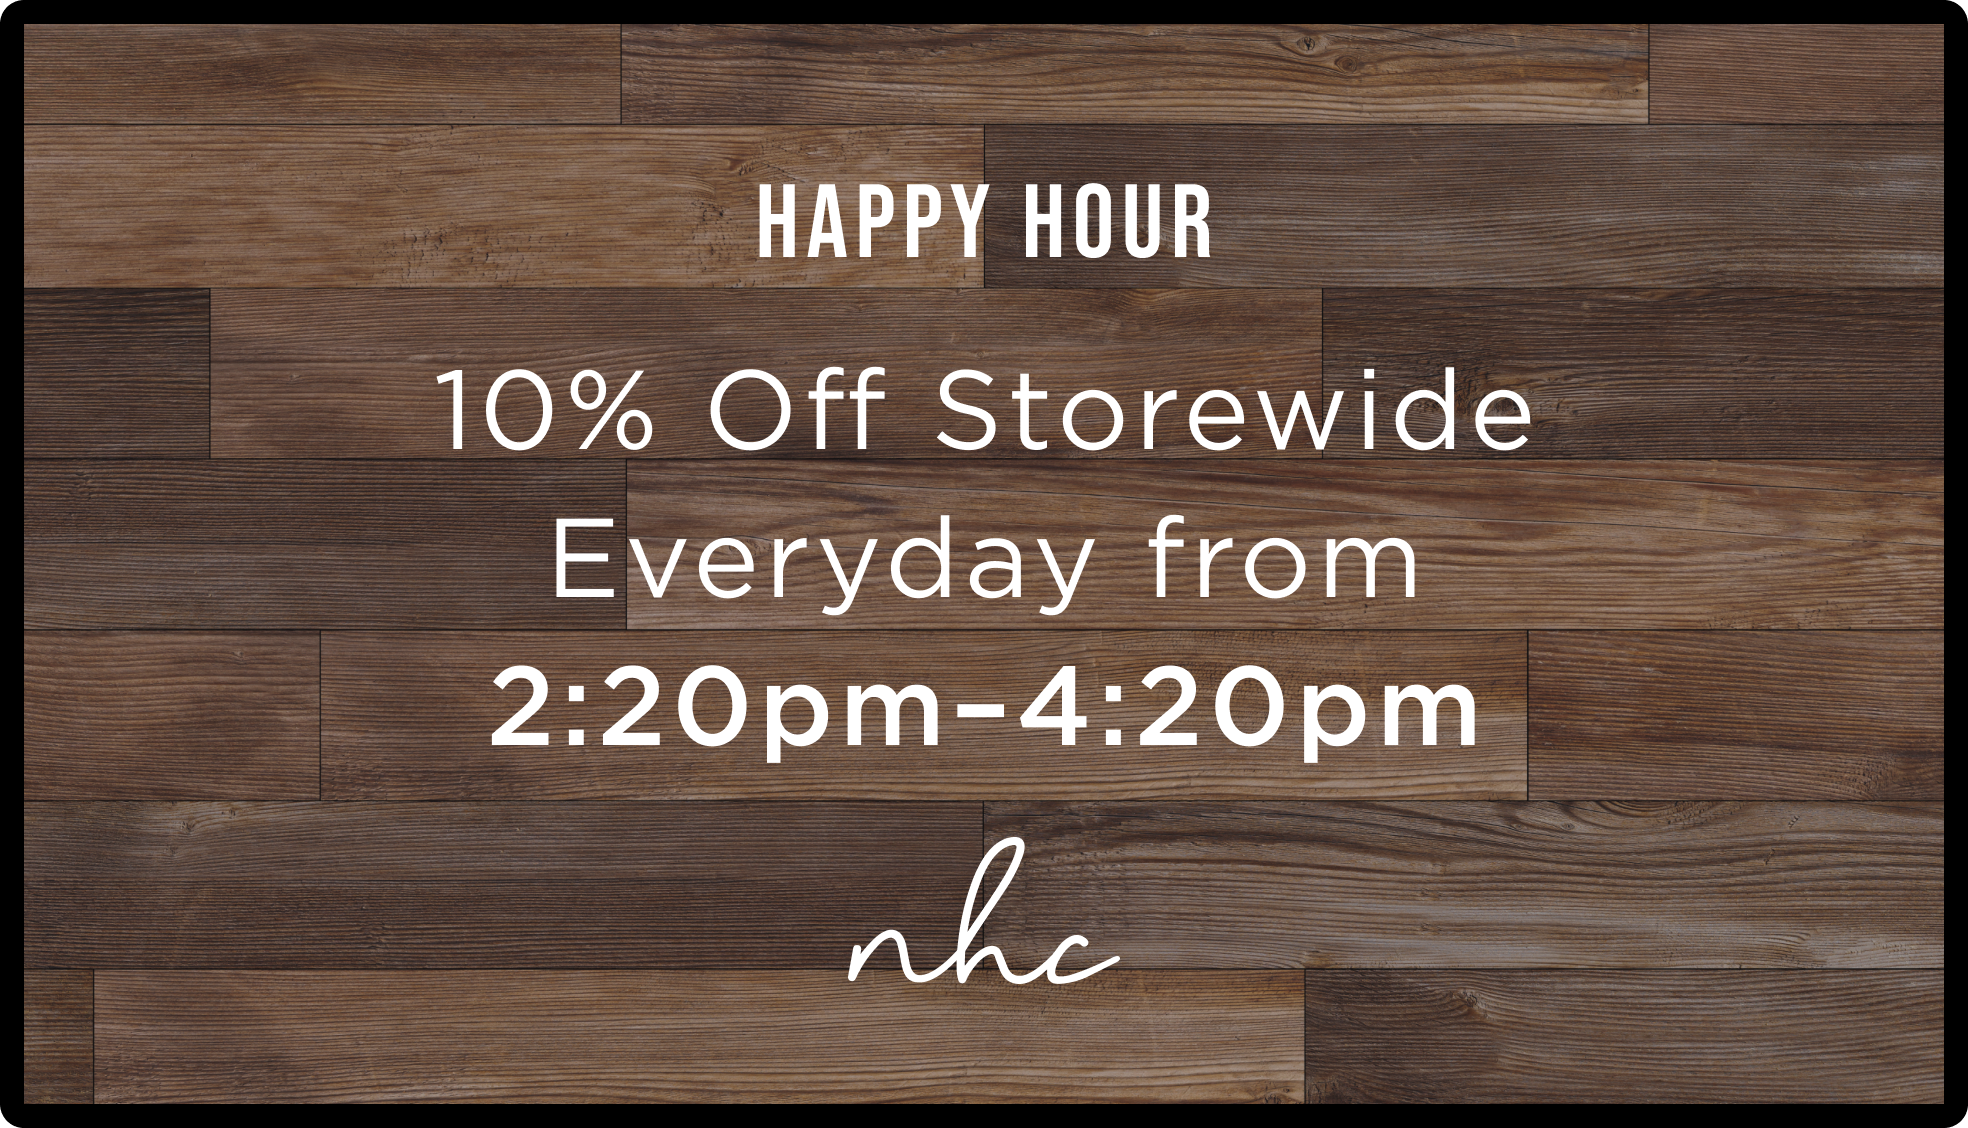 happy hour promotion at dispensary - 10% off storewide